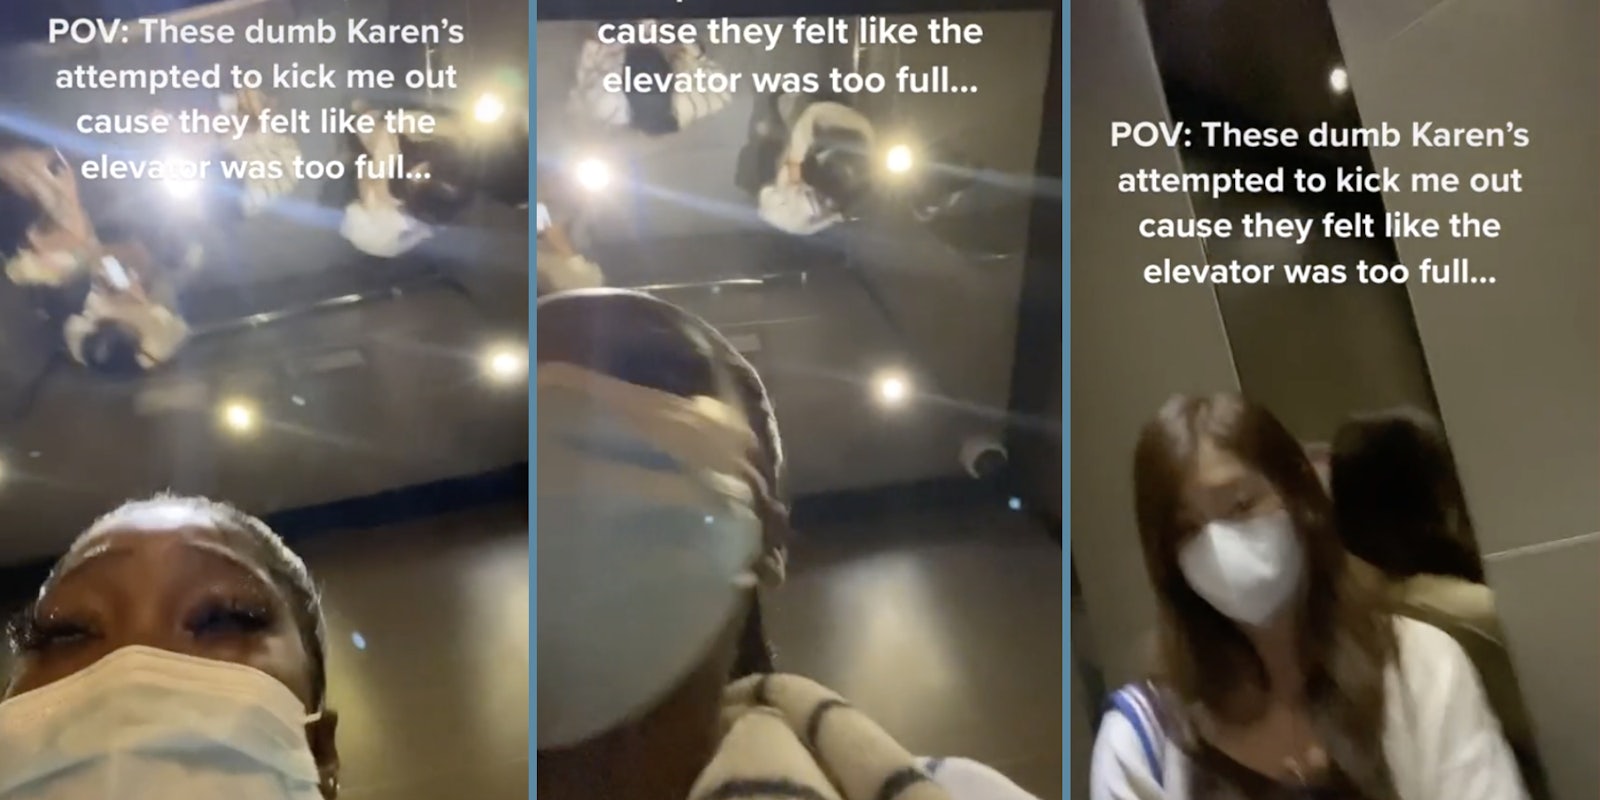 woman standing in elevator in altercation with 3 other woman, camera is pointed up to show reflection of other women on the ceiling